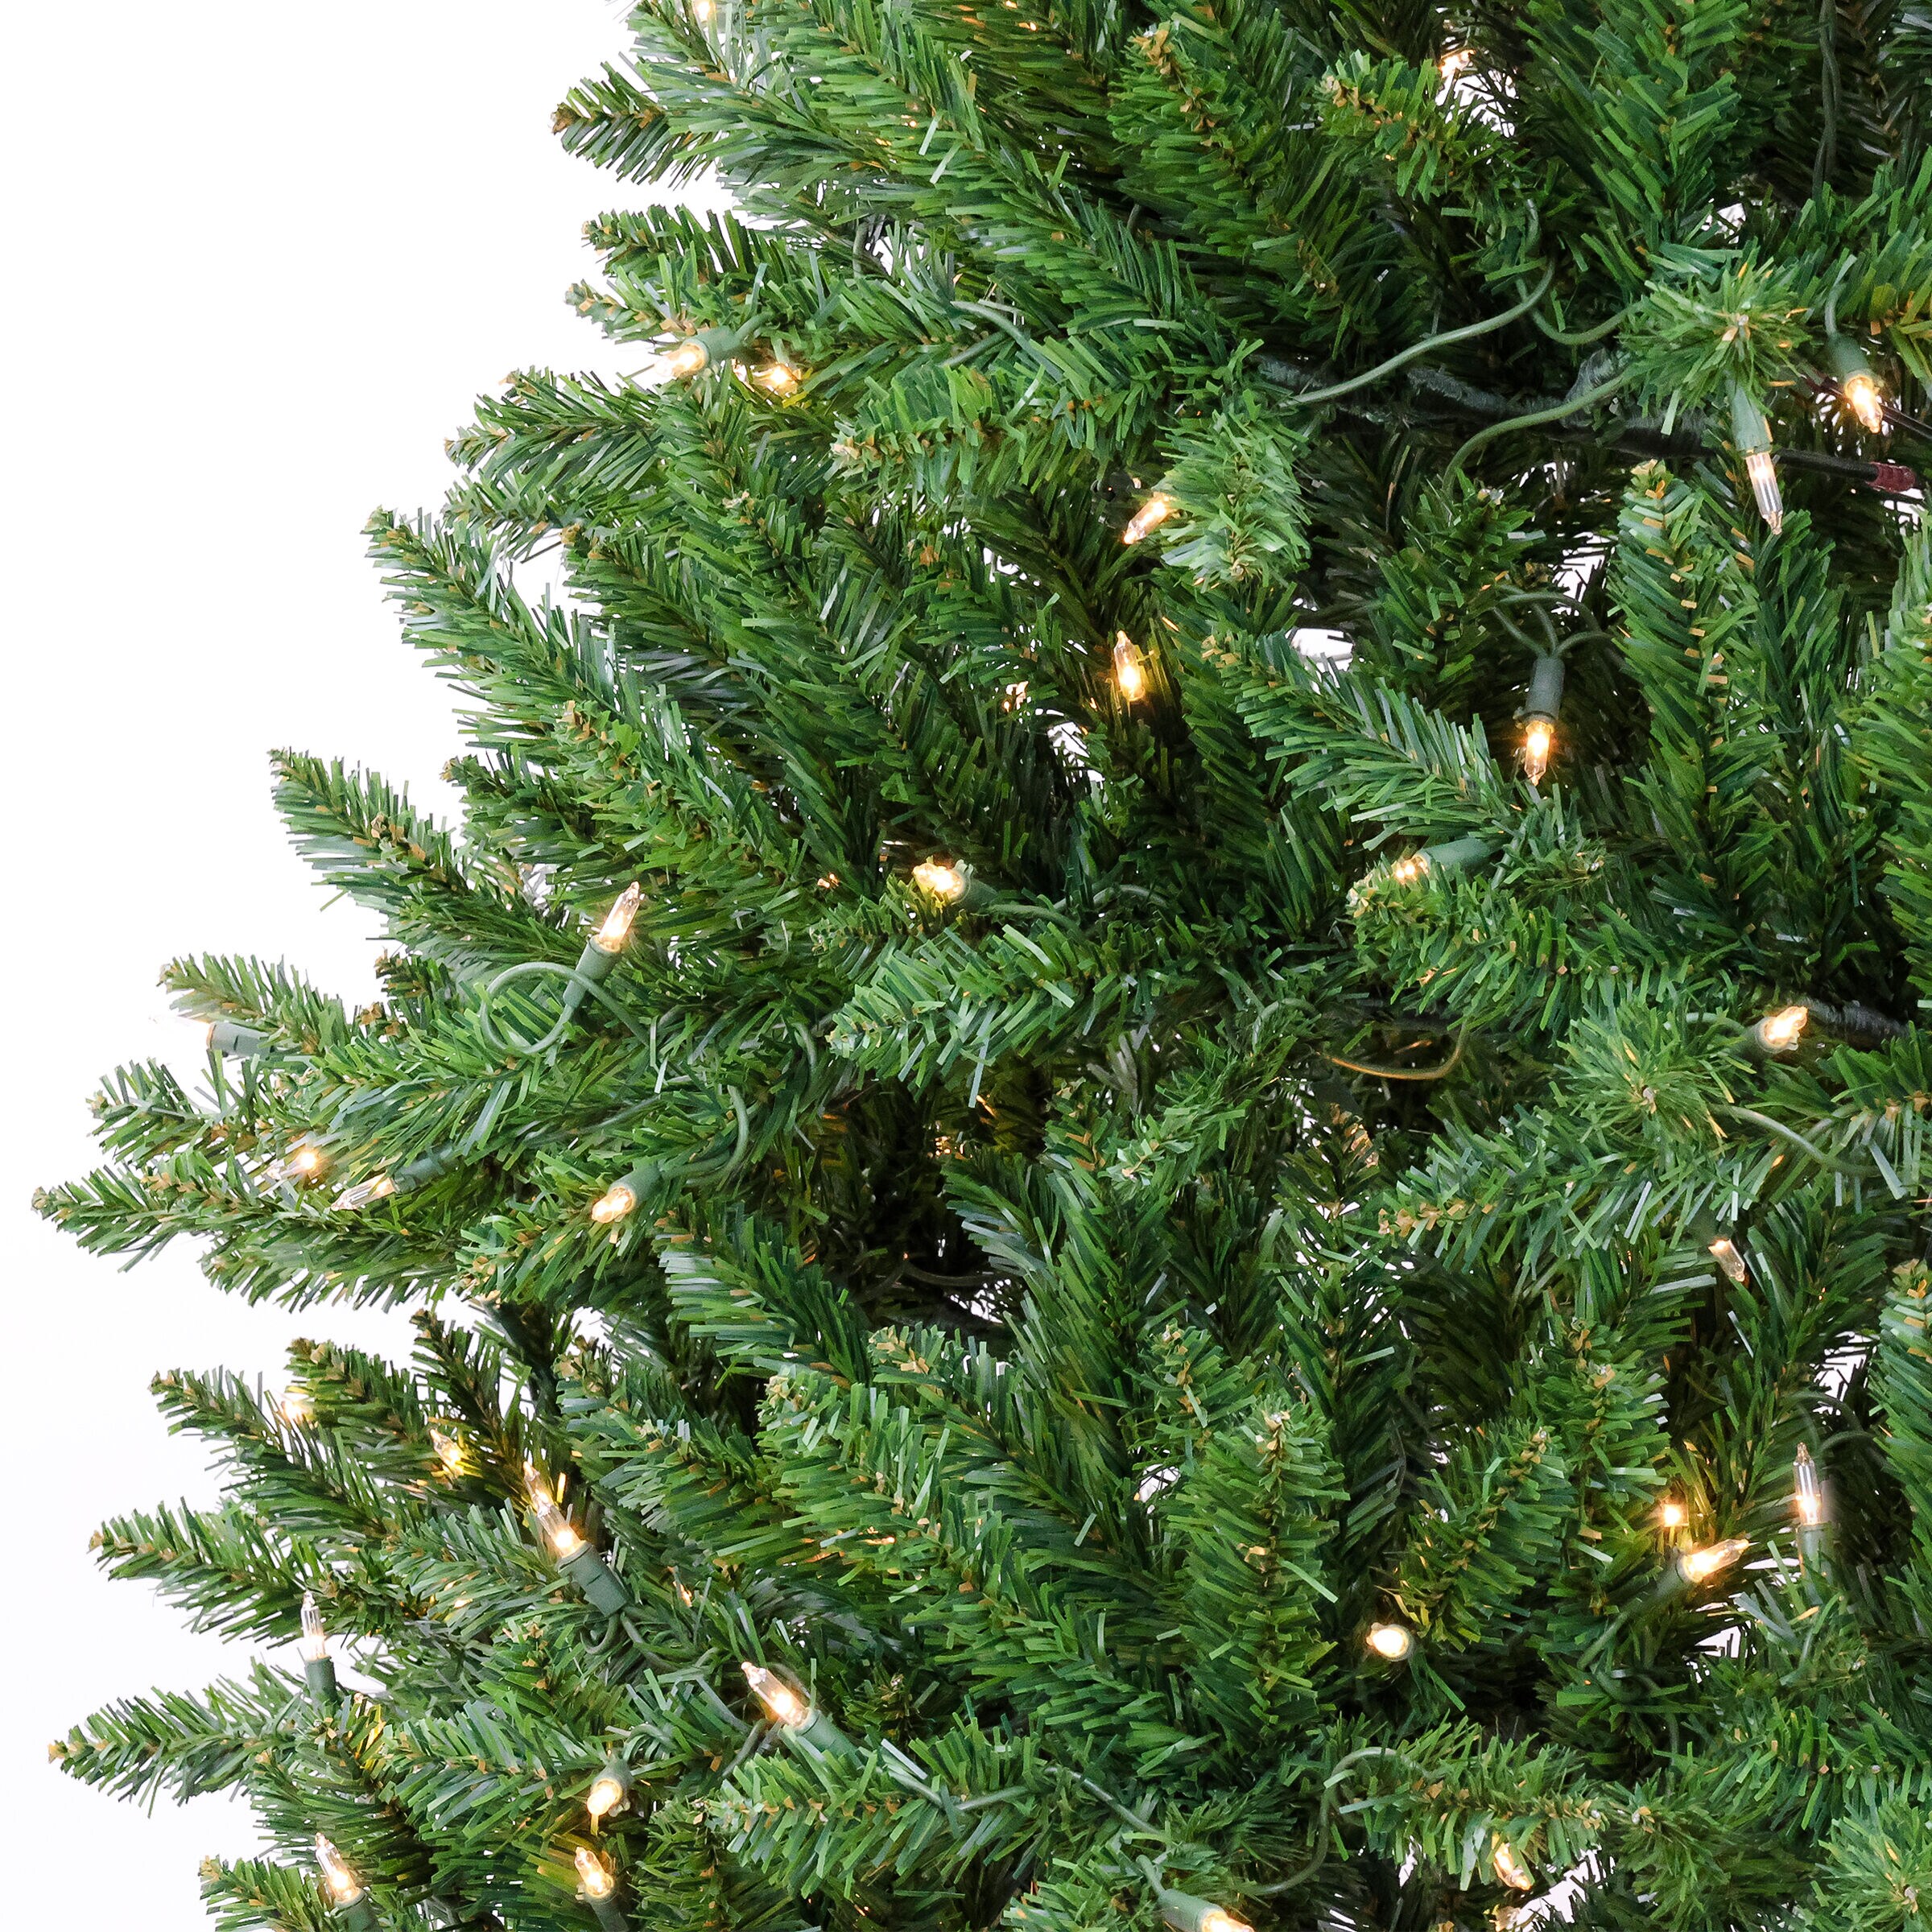 National Tree Company 7.5-ft Spruce Pre-lit Artificial Christmas Tree ...